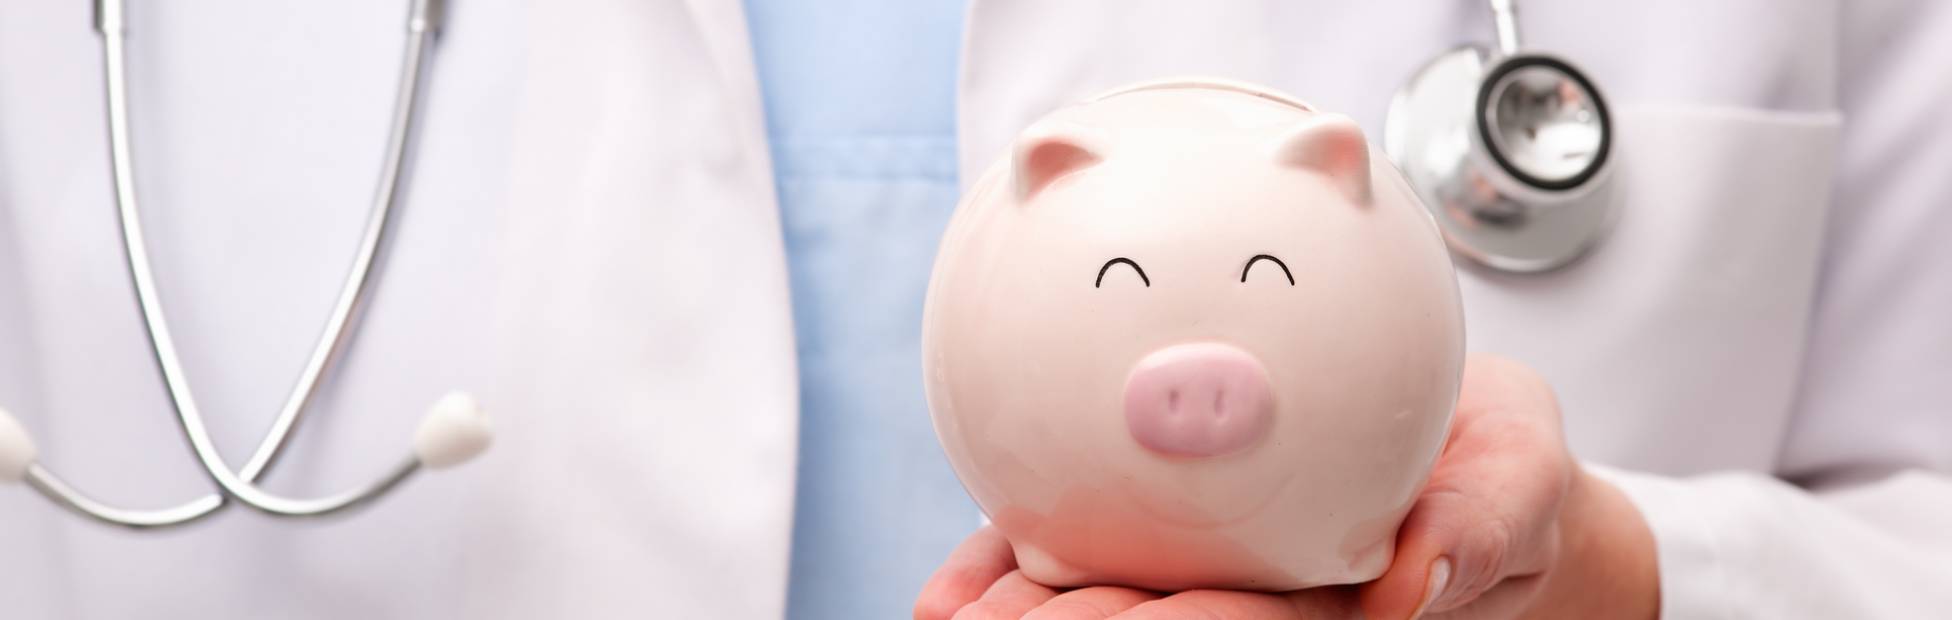 A picture showing a female physician holding a piggy bank on her hand.